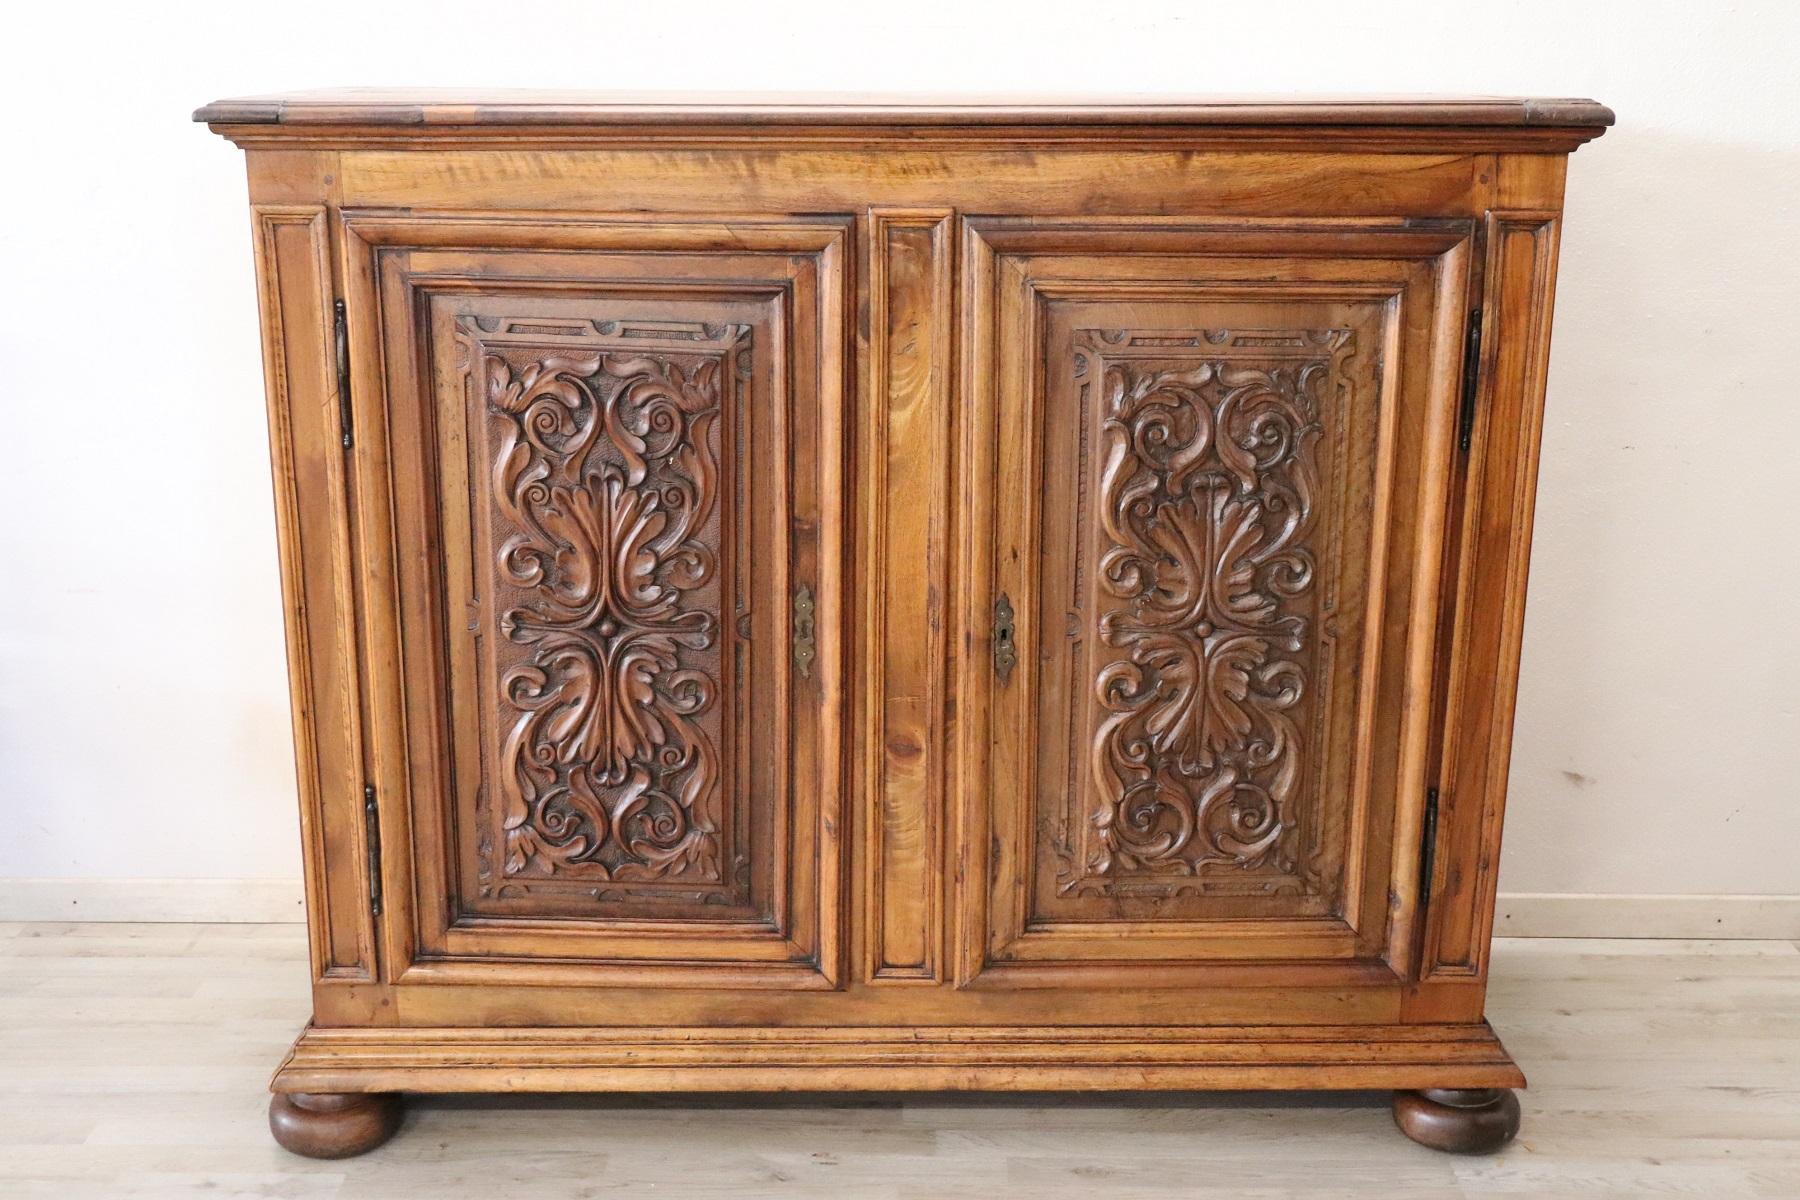 Important and rare antique solid walnut sideboard, 19th century. Characterized by a refined hand carving of the wood on the front doors. The fine walnut wood has acquired a beautiful old patina. Internally equipped with two shelves. Majestic and